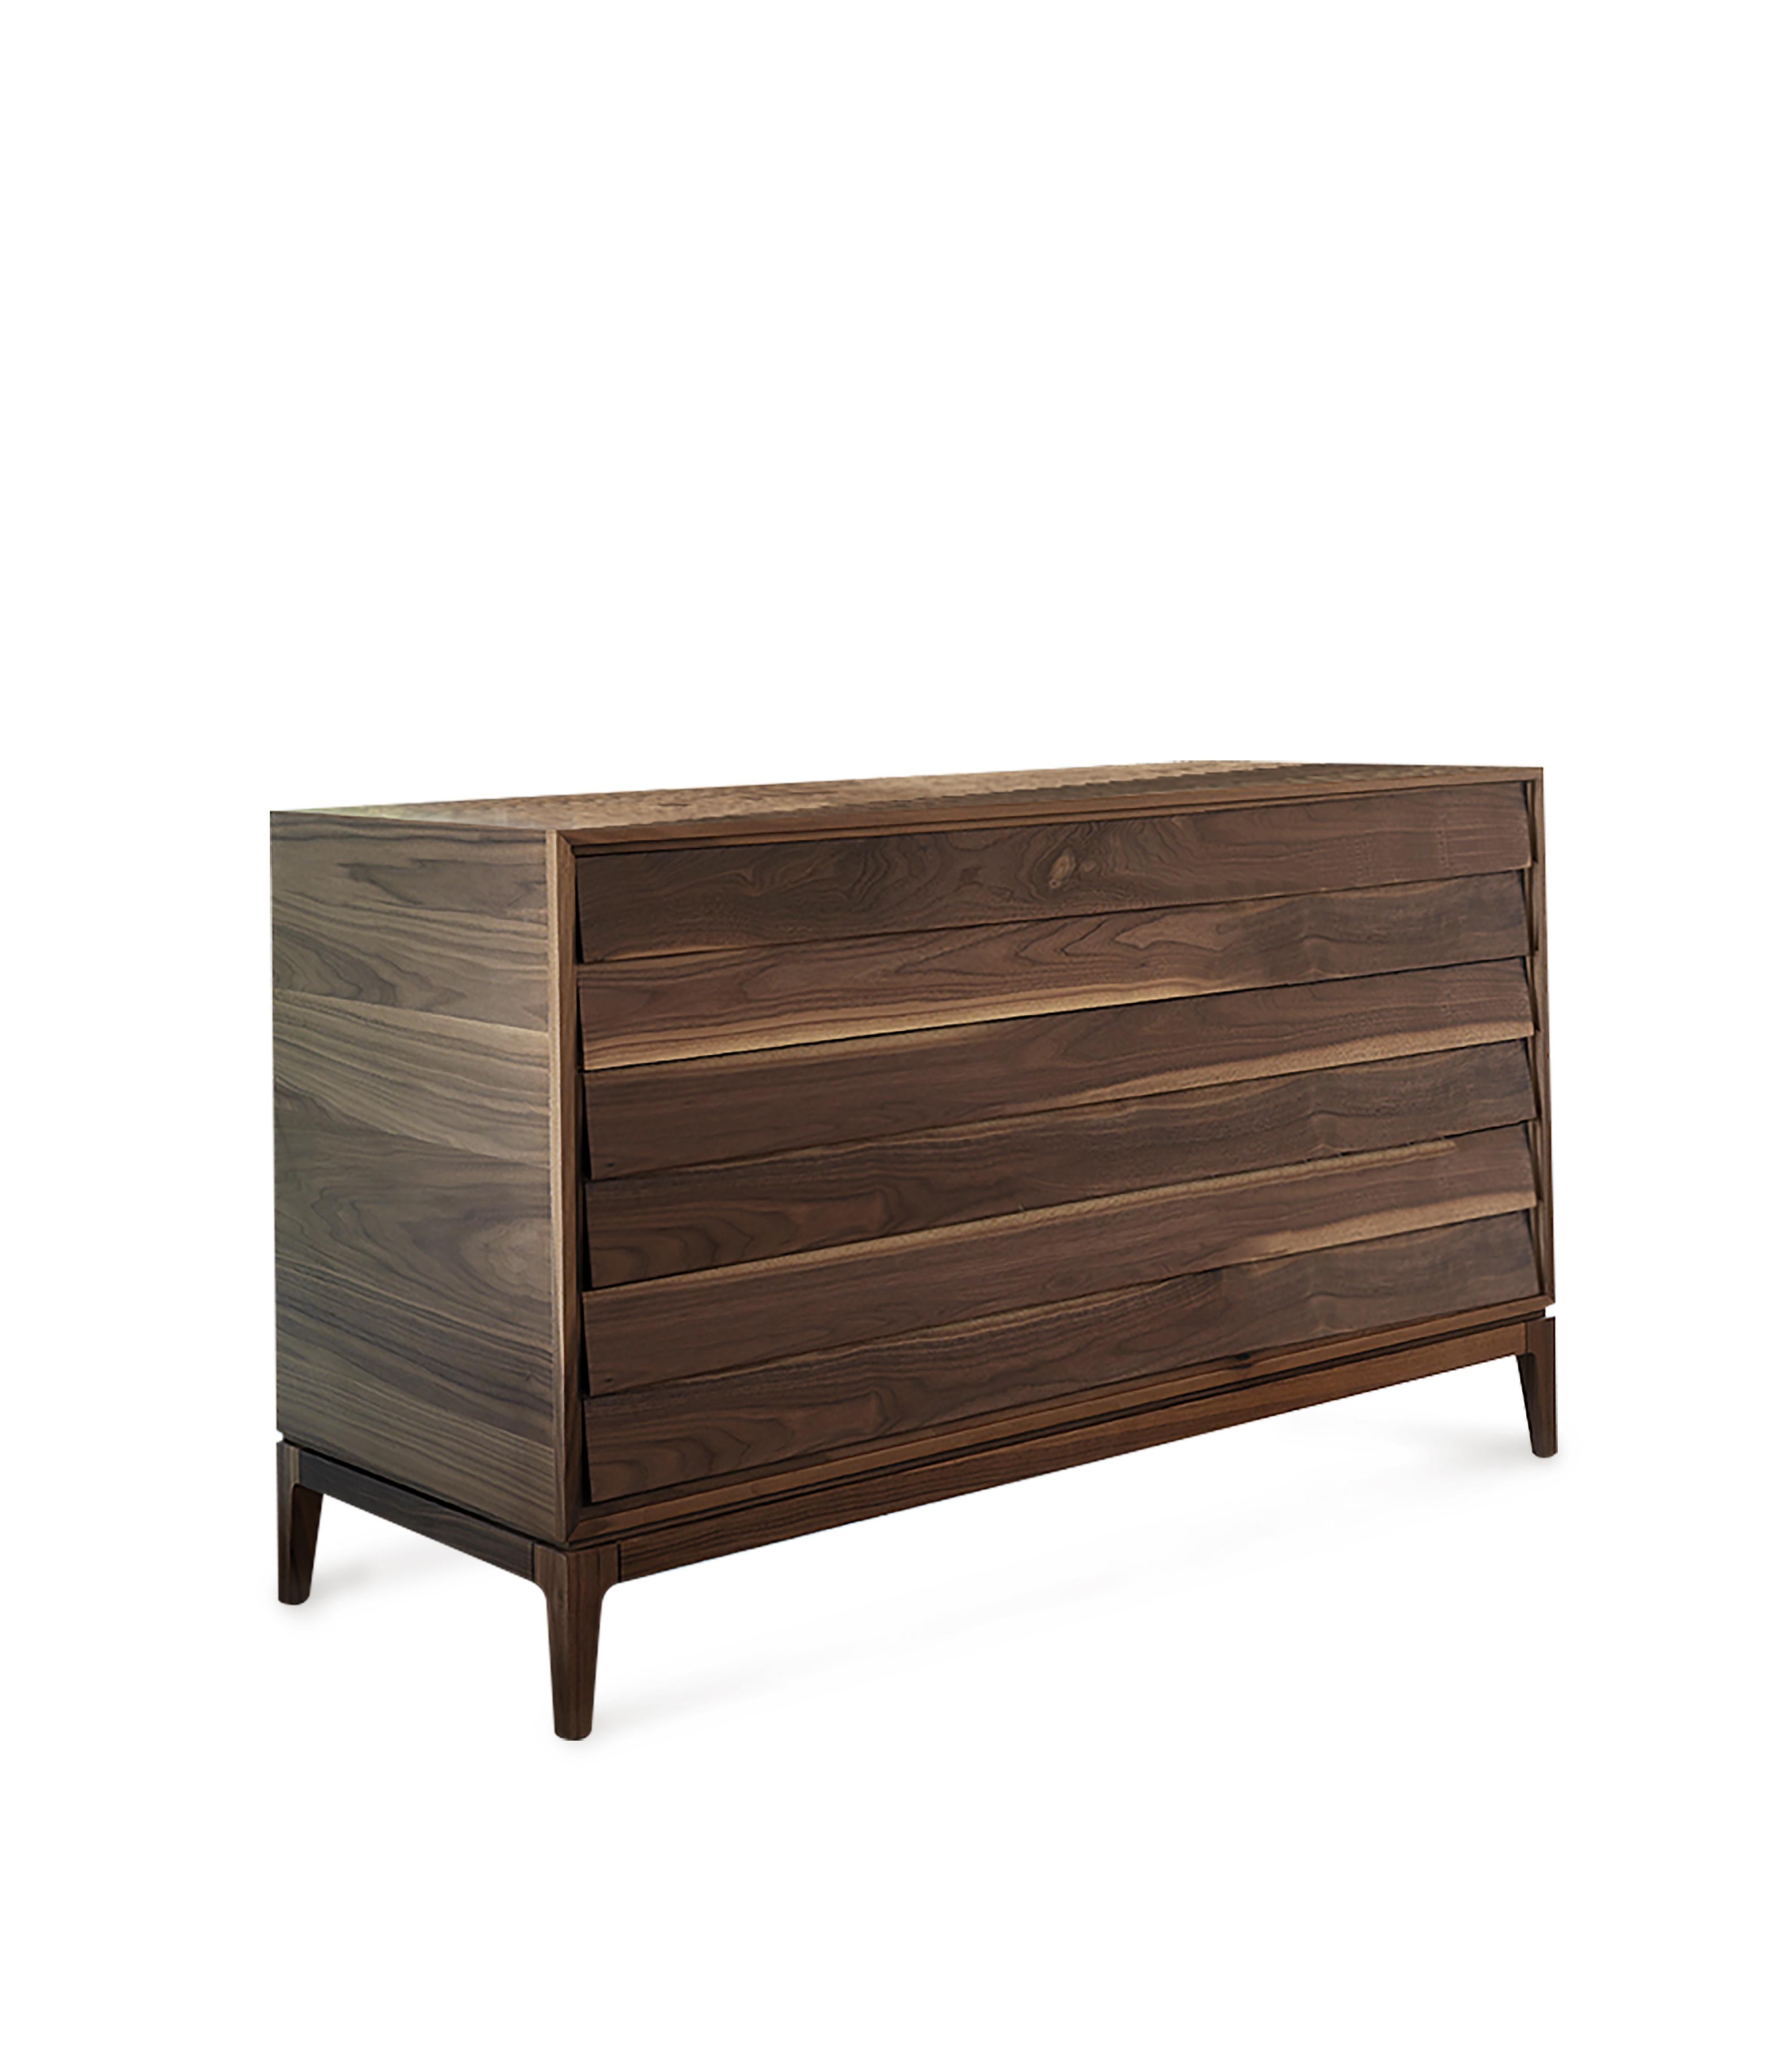 Modern Liliale Solid Wood Dresser, Walnut in Hand-Made Natural Finish, Contemporary For Sale